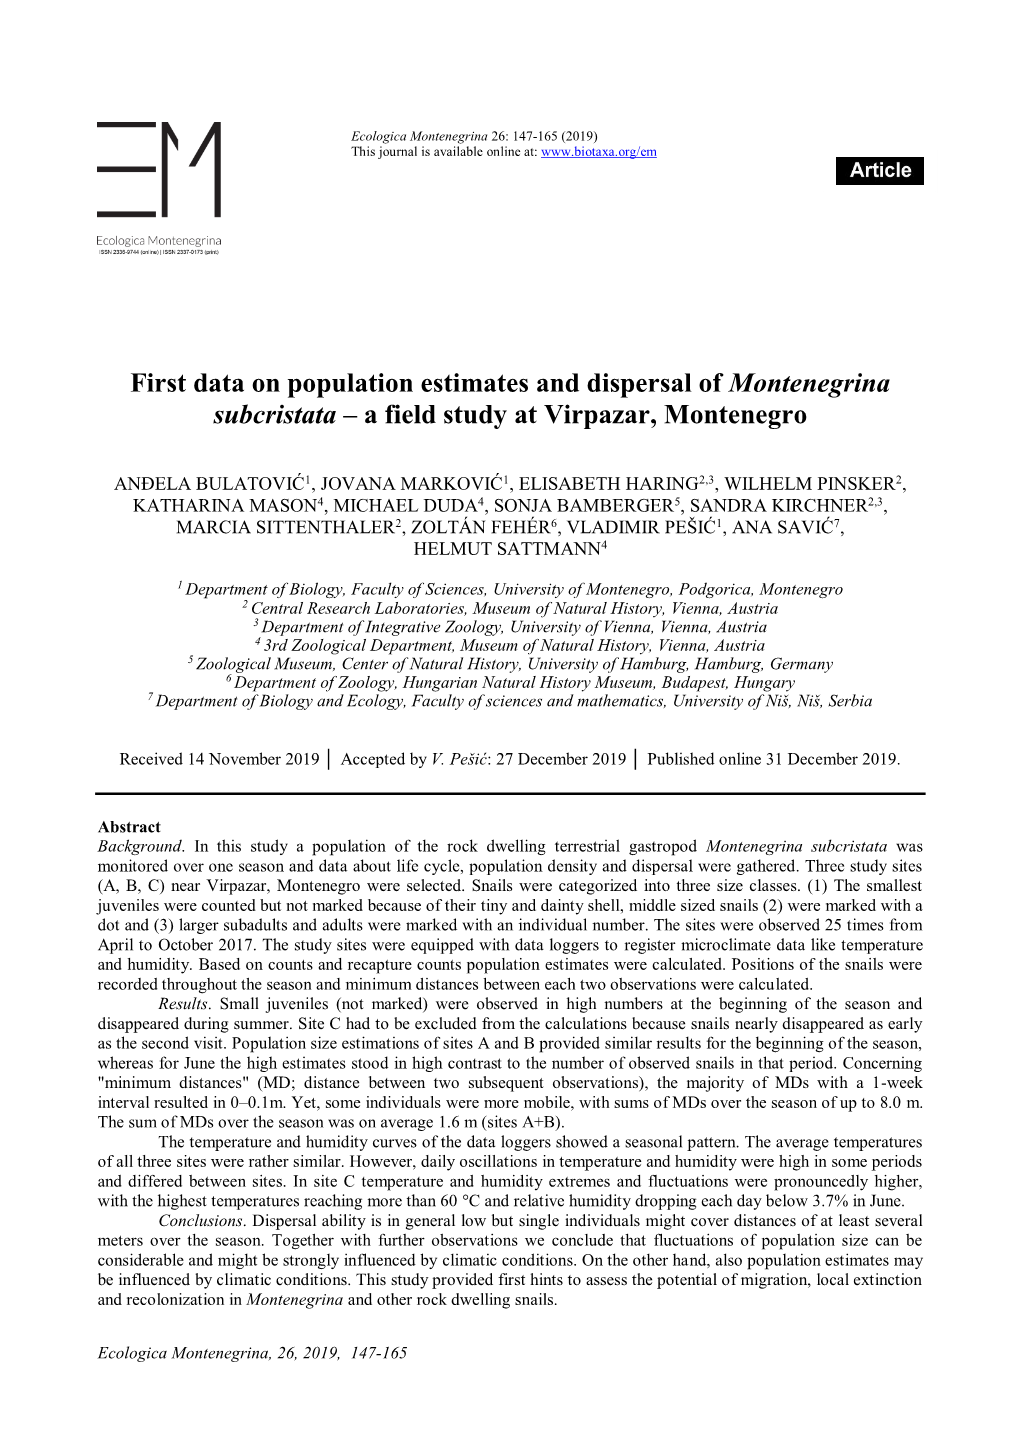 First Data on Population Estimates and Dispersal of Montenegrina Subcristata – a Field Study at Virpazar, Montenegro